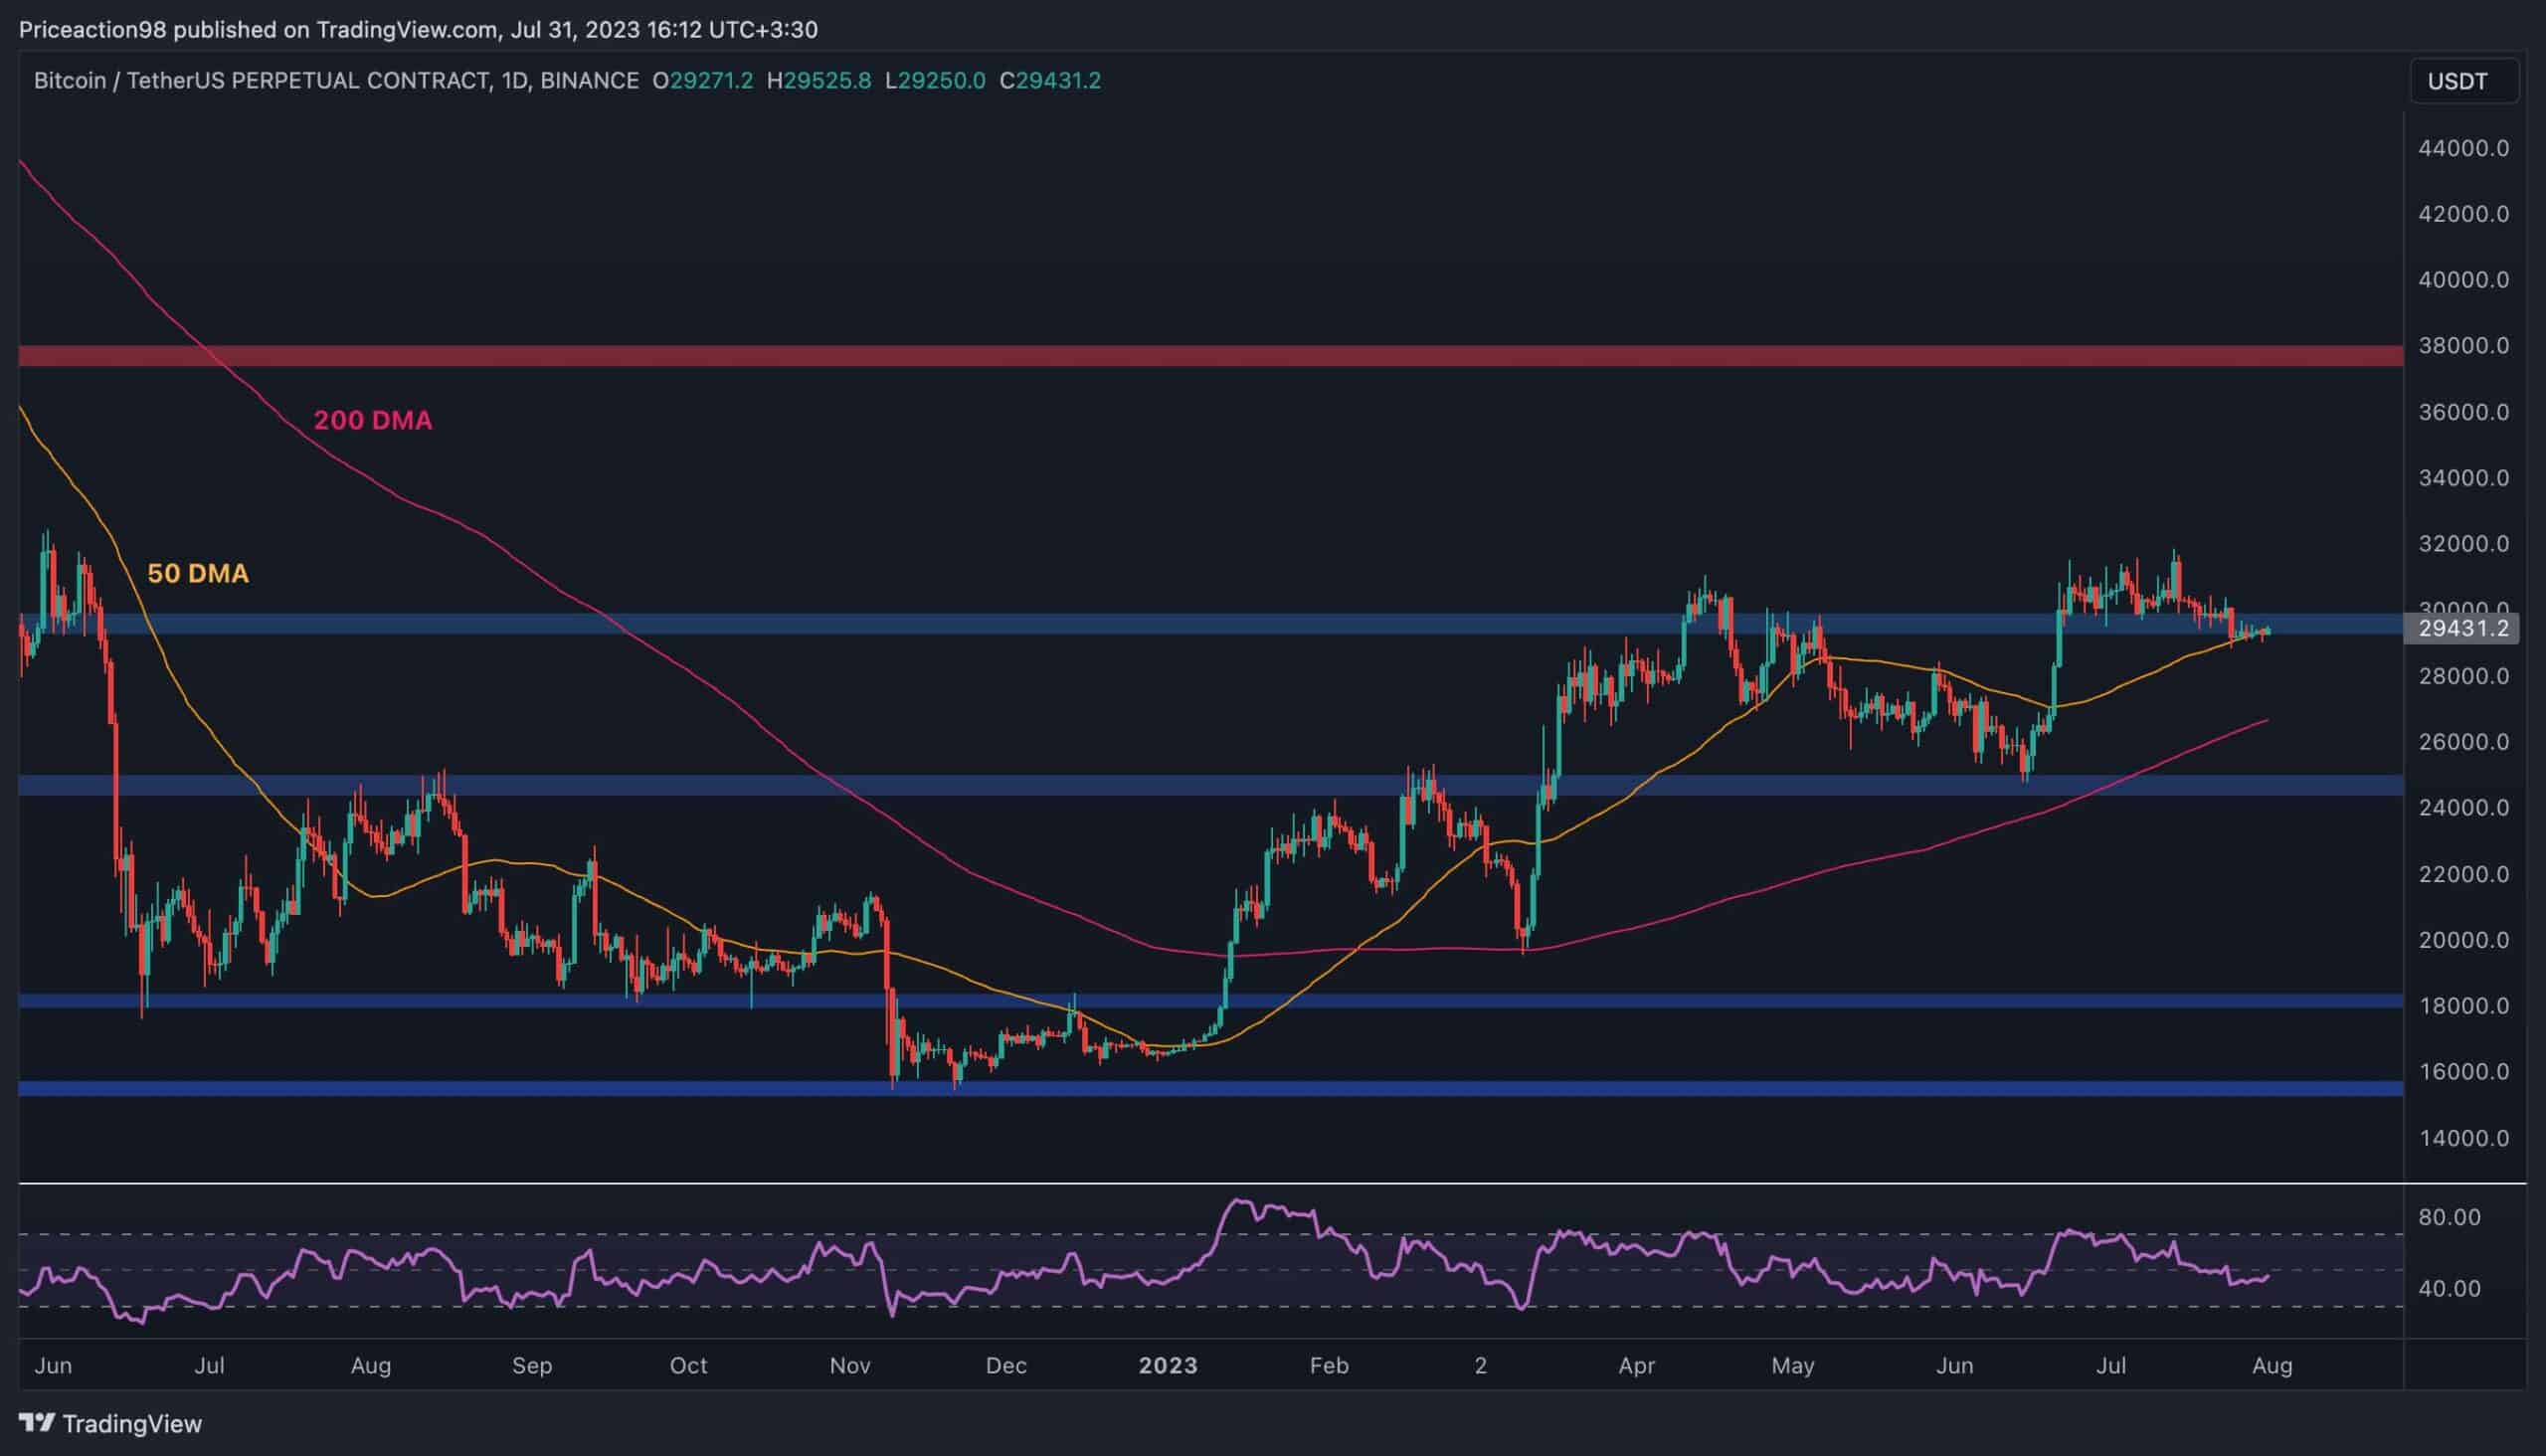 Two Possible Targets for BTC in the Short Term (Bitcoin Price Analysis)